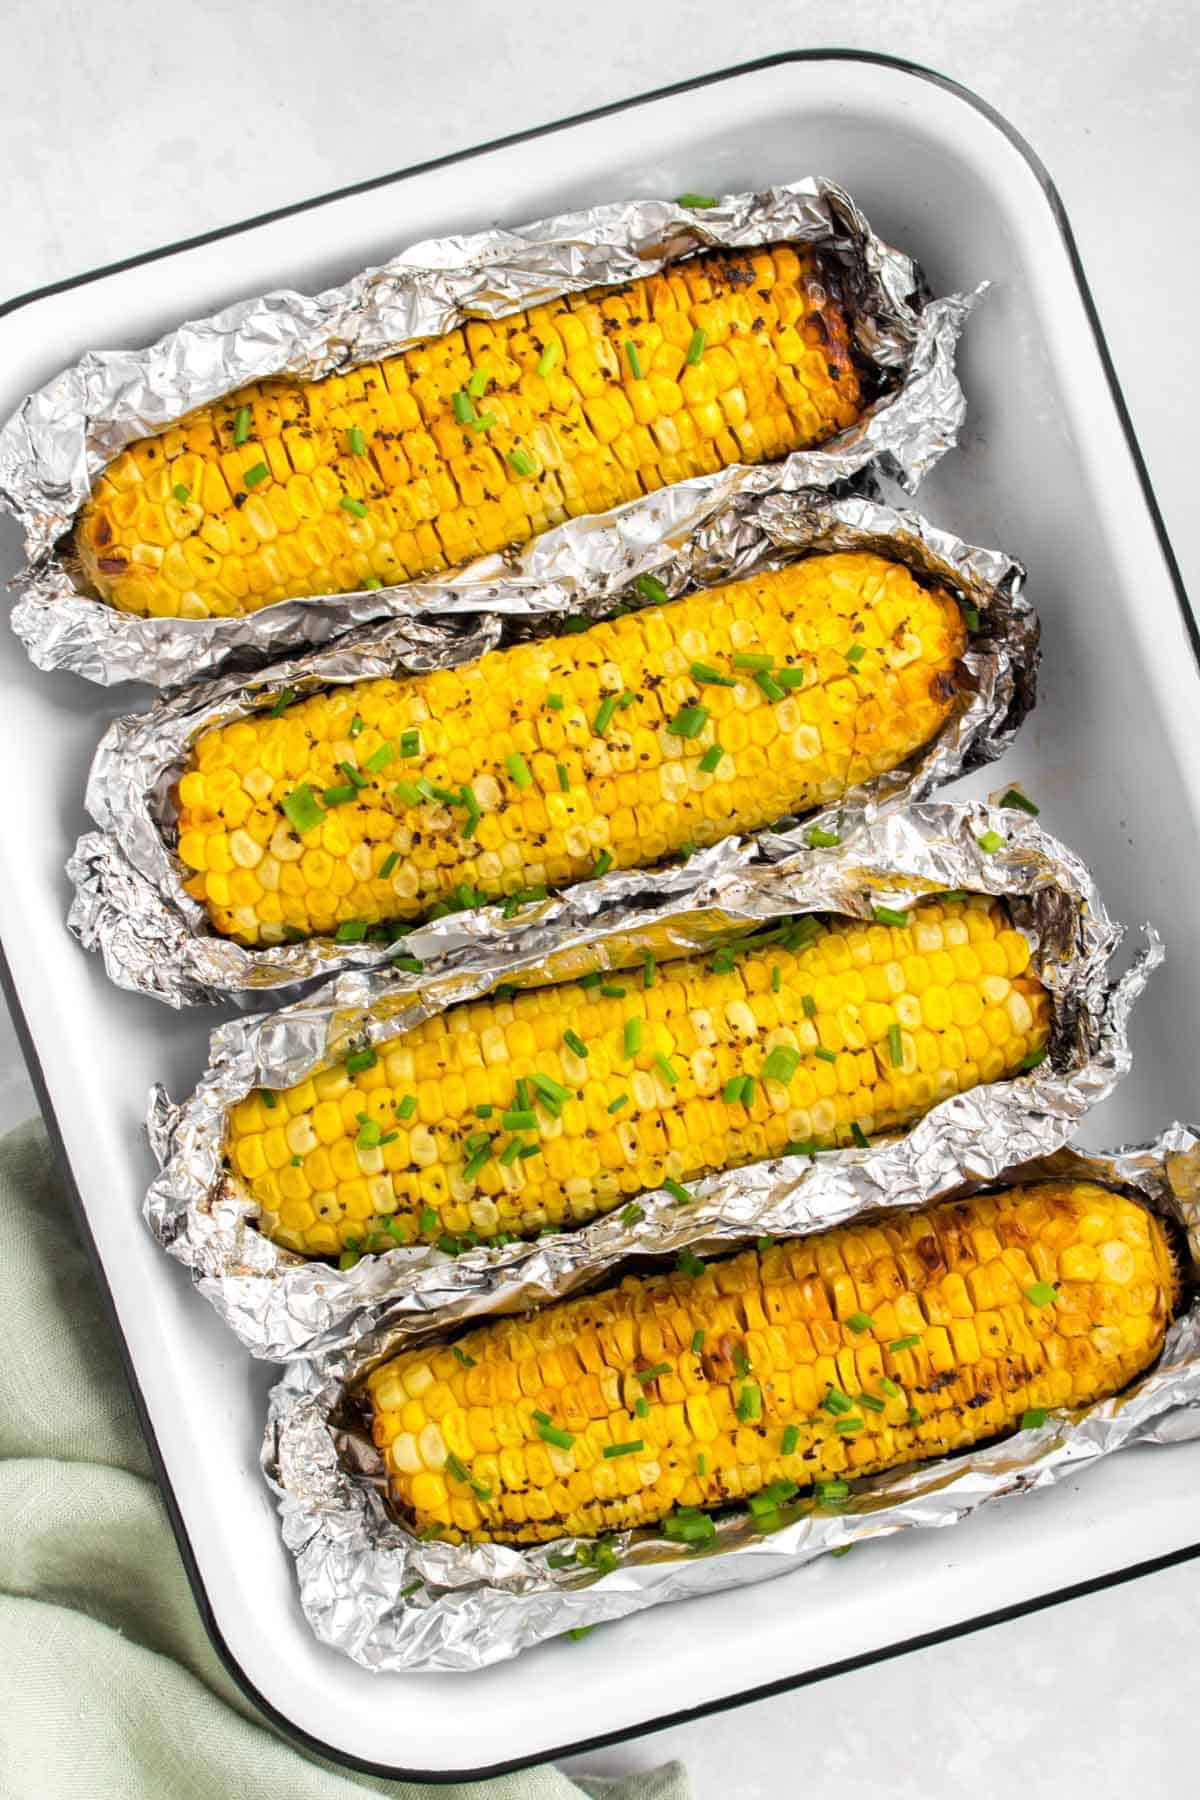 Overhead view of a tray with four corn on the cob with tin foil around them.